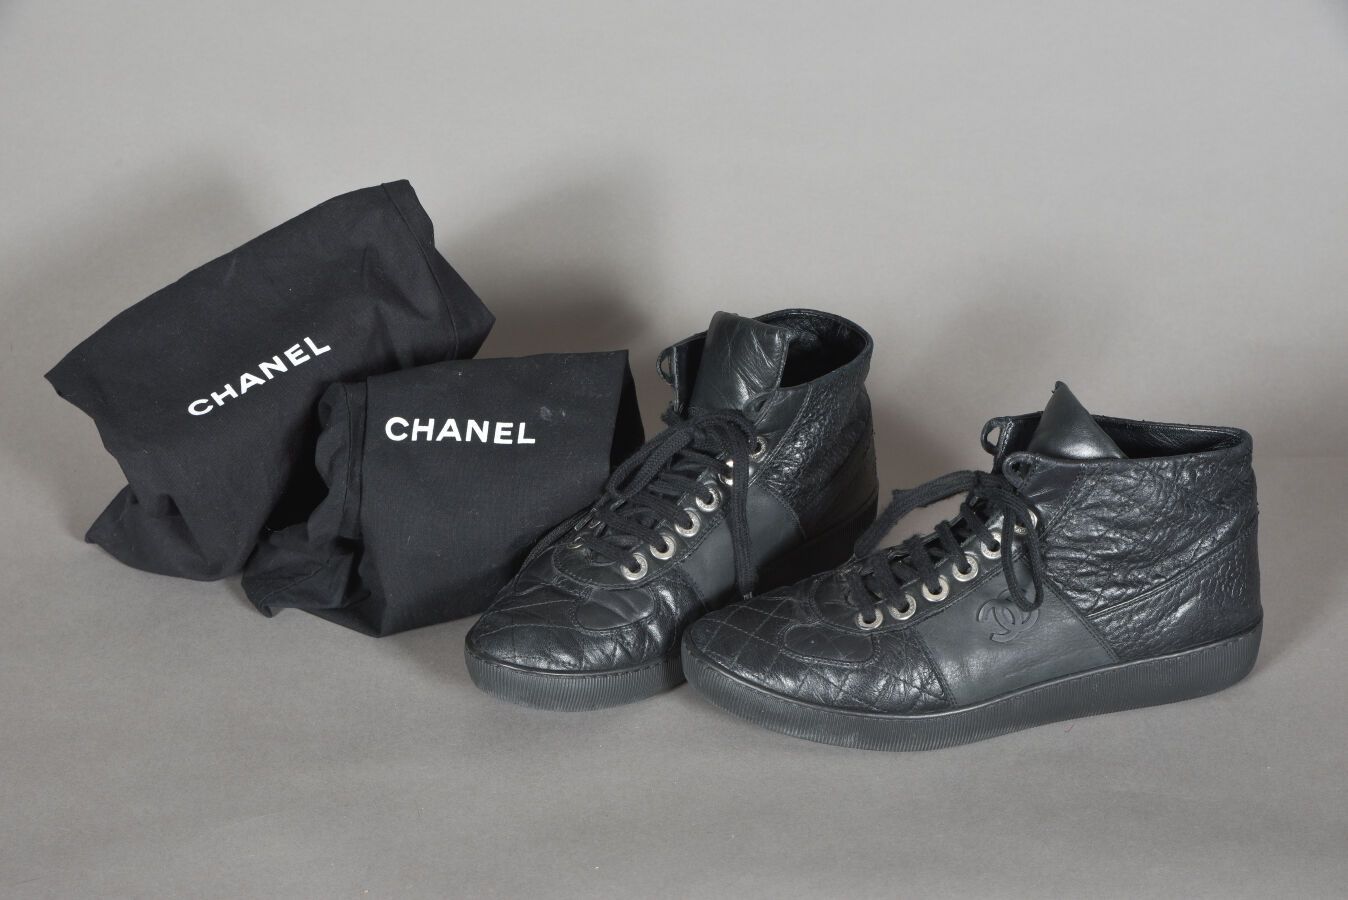 CHANEL. Pair of black quilted leather high-top sneakers,…